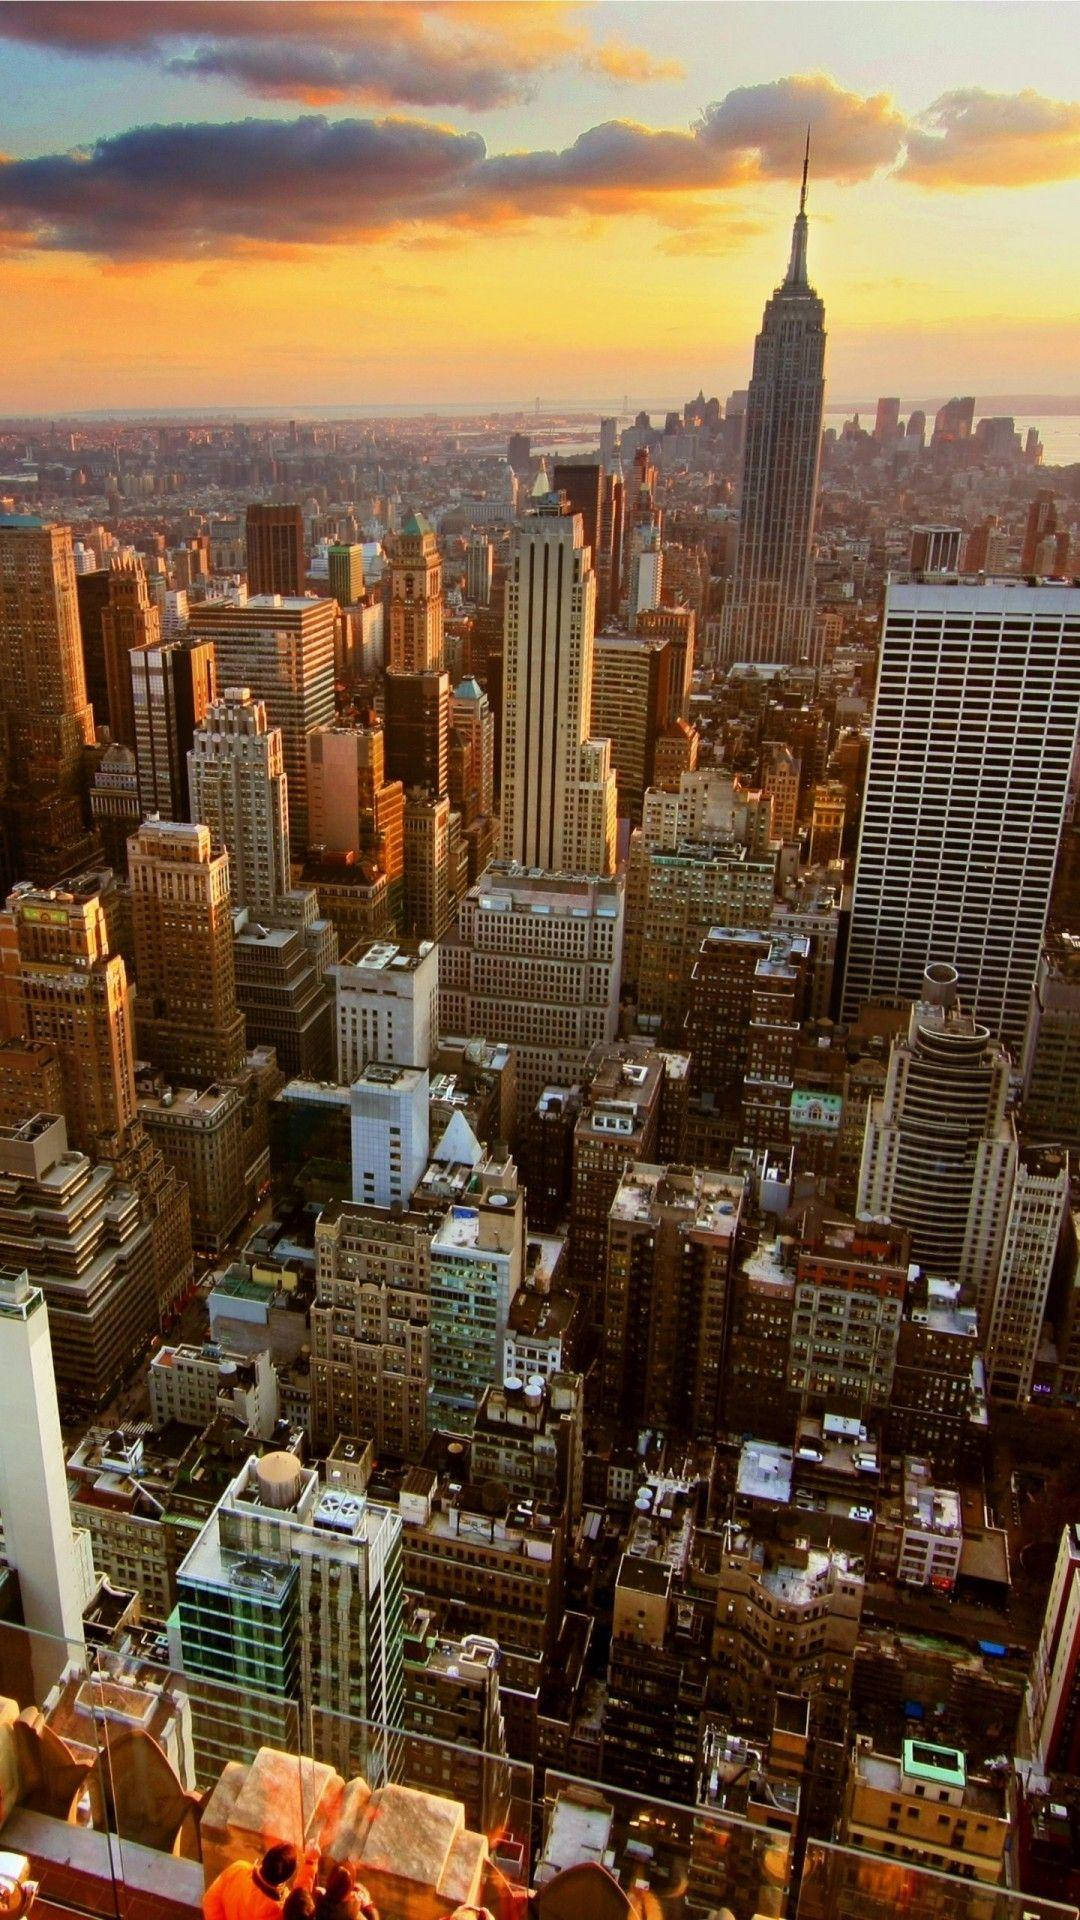 Download wallpaper 1350x2400 new york skyscrapers sunset metropolis  iphone 876s6 for parallax hd background